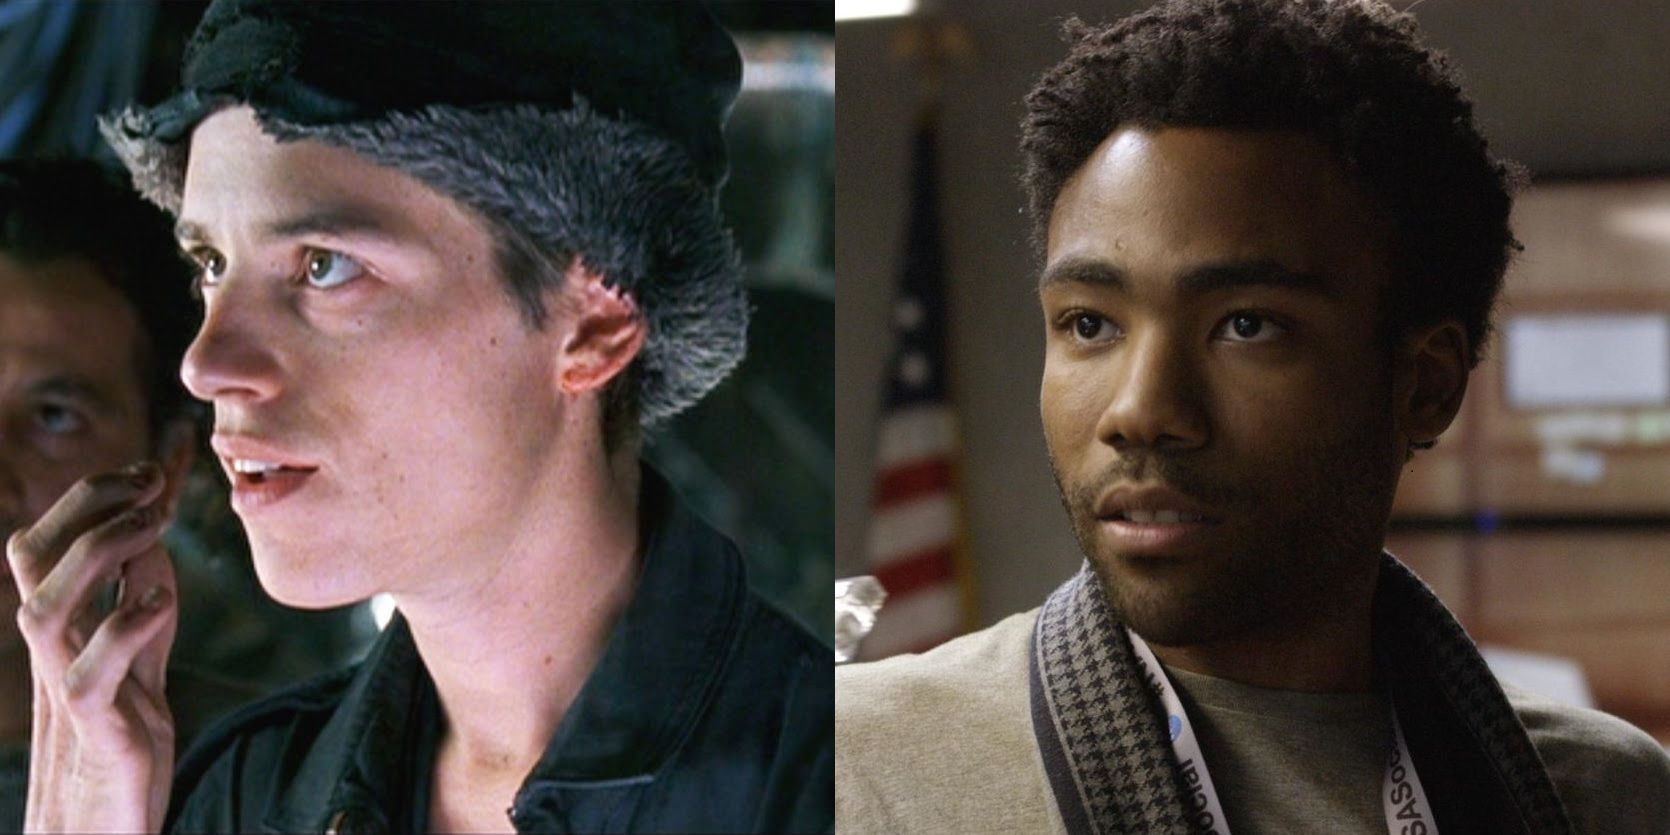 Matt Doran as Mouse in The Matrix, with Donald Glover